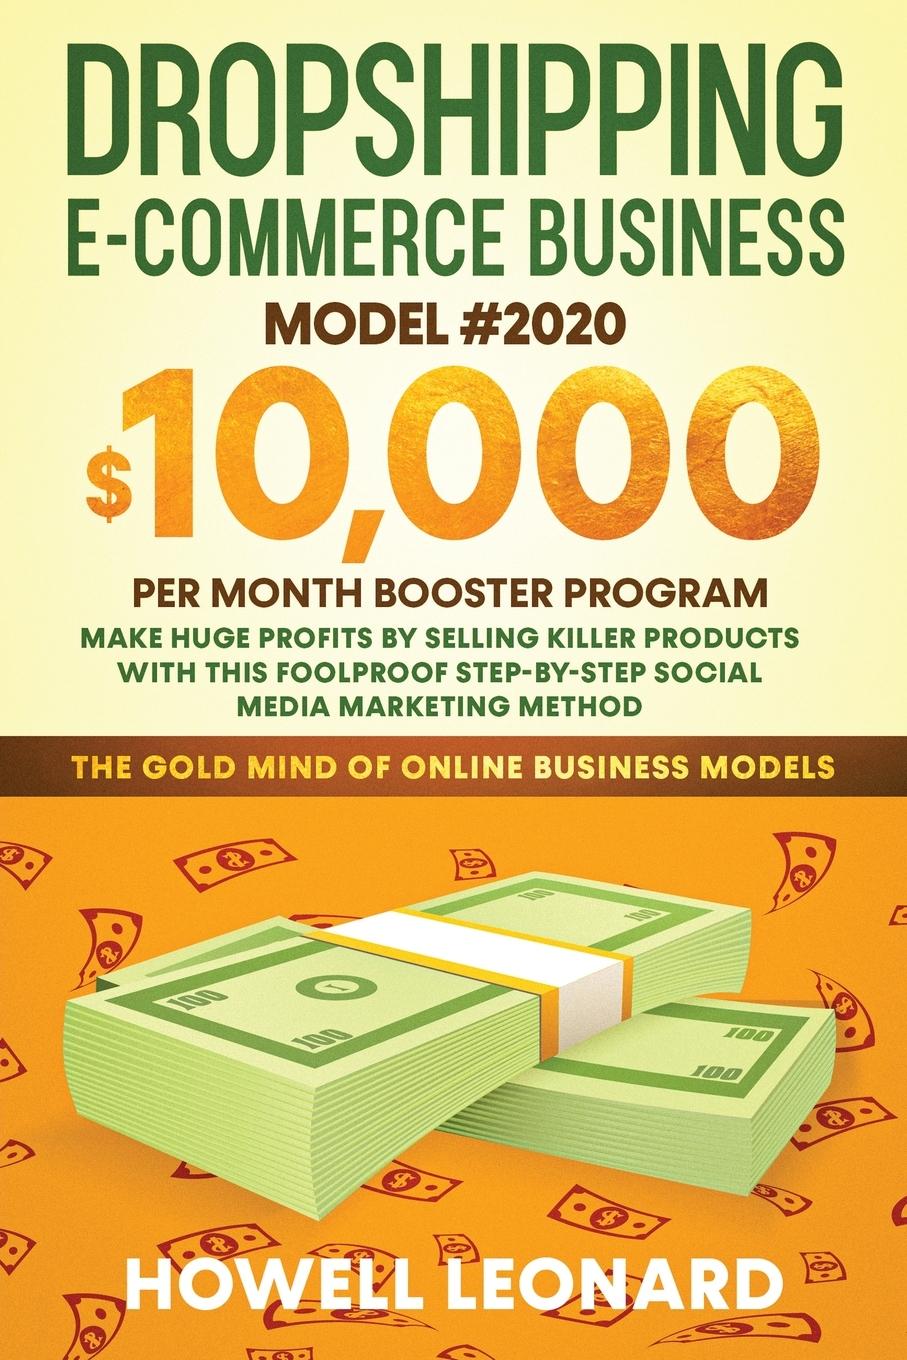 Book Dropshipping Ecommerce Business Model #2020 